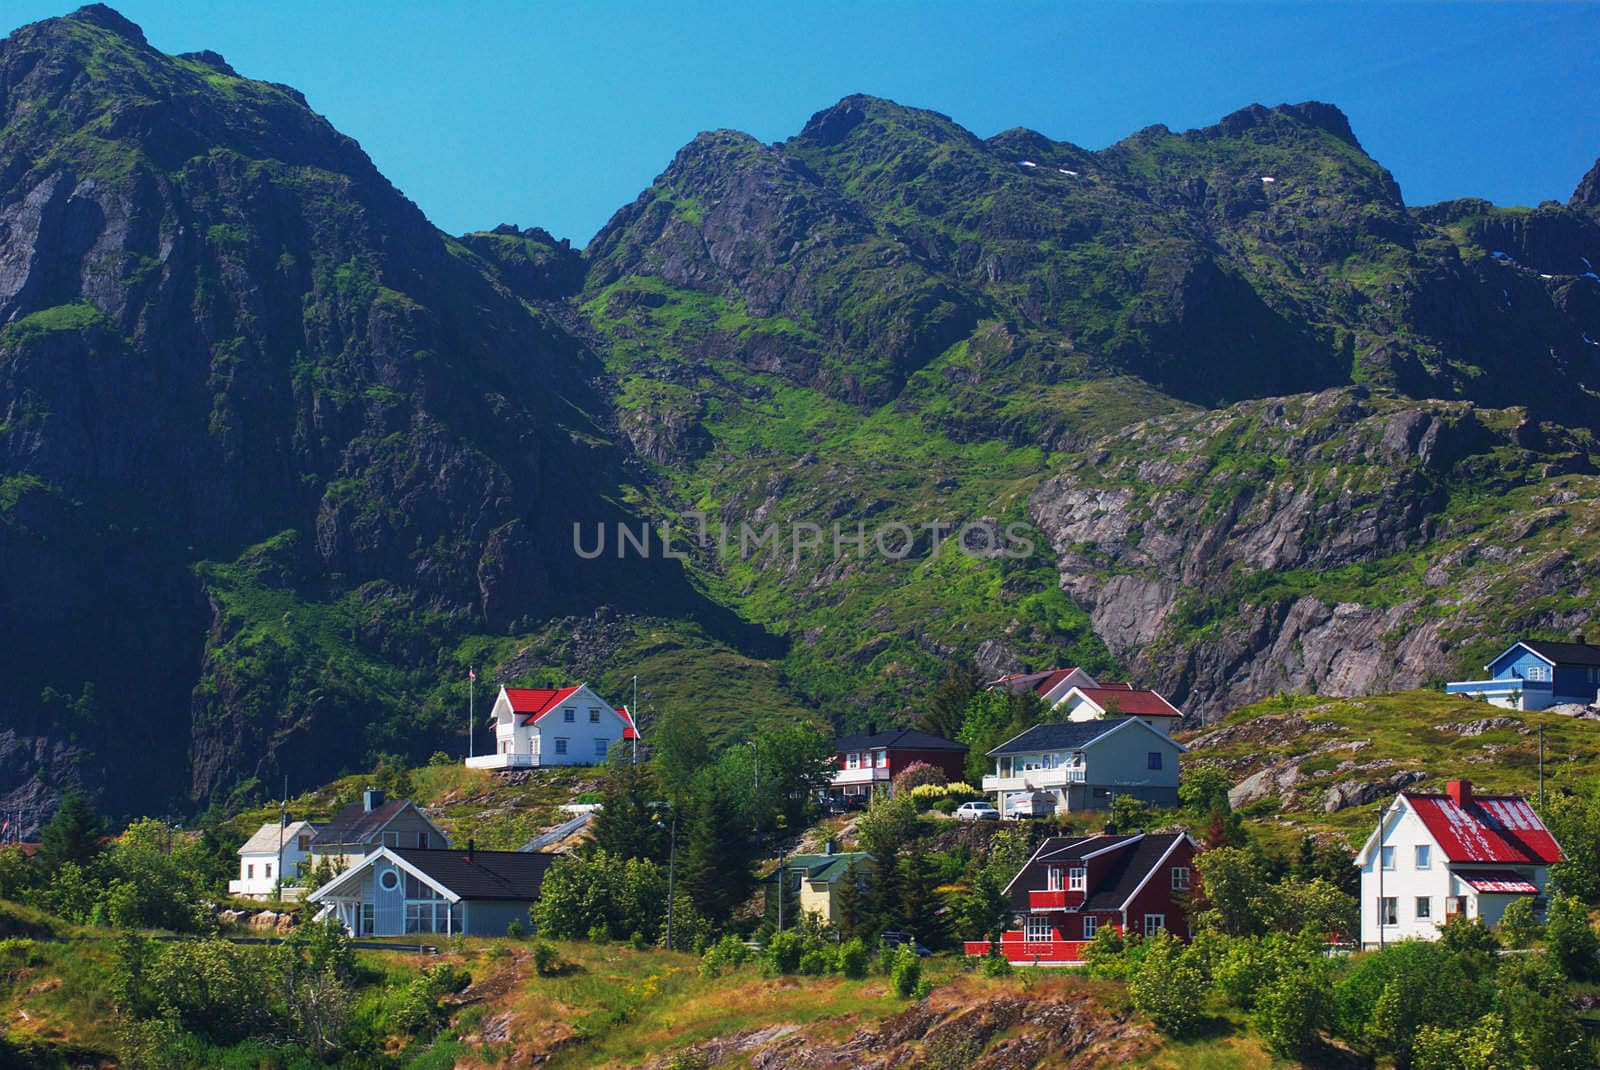 Small settlement in between ruuged mountain scenery on the Lofoten Islands (Norway)